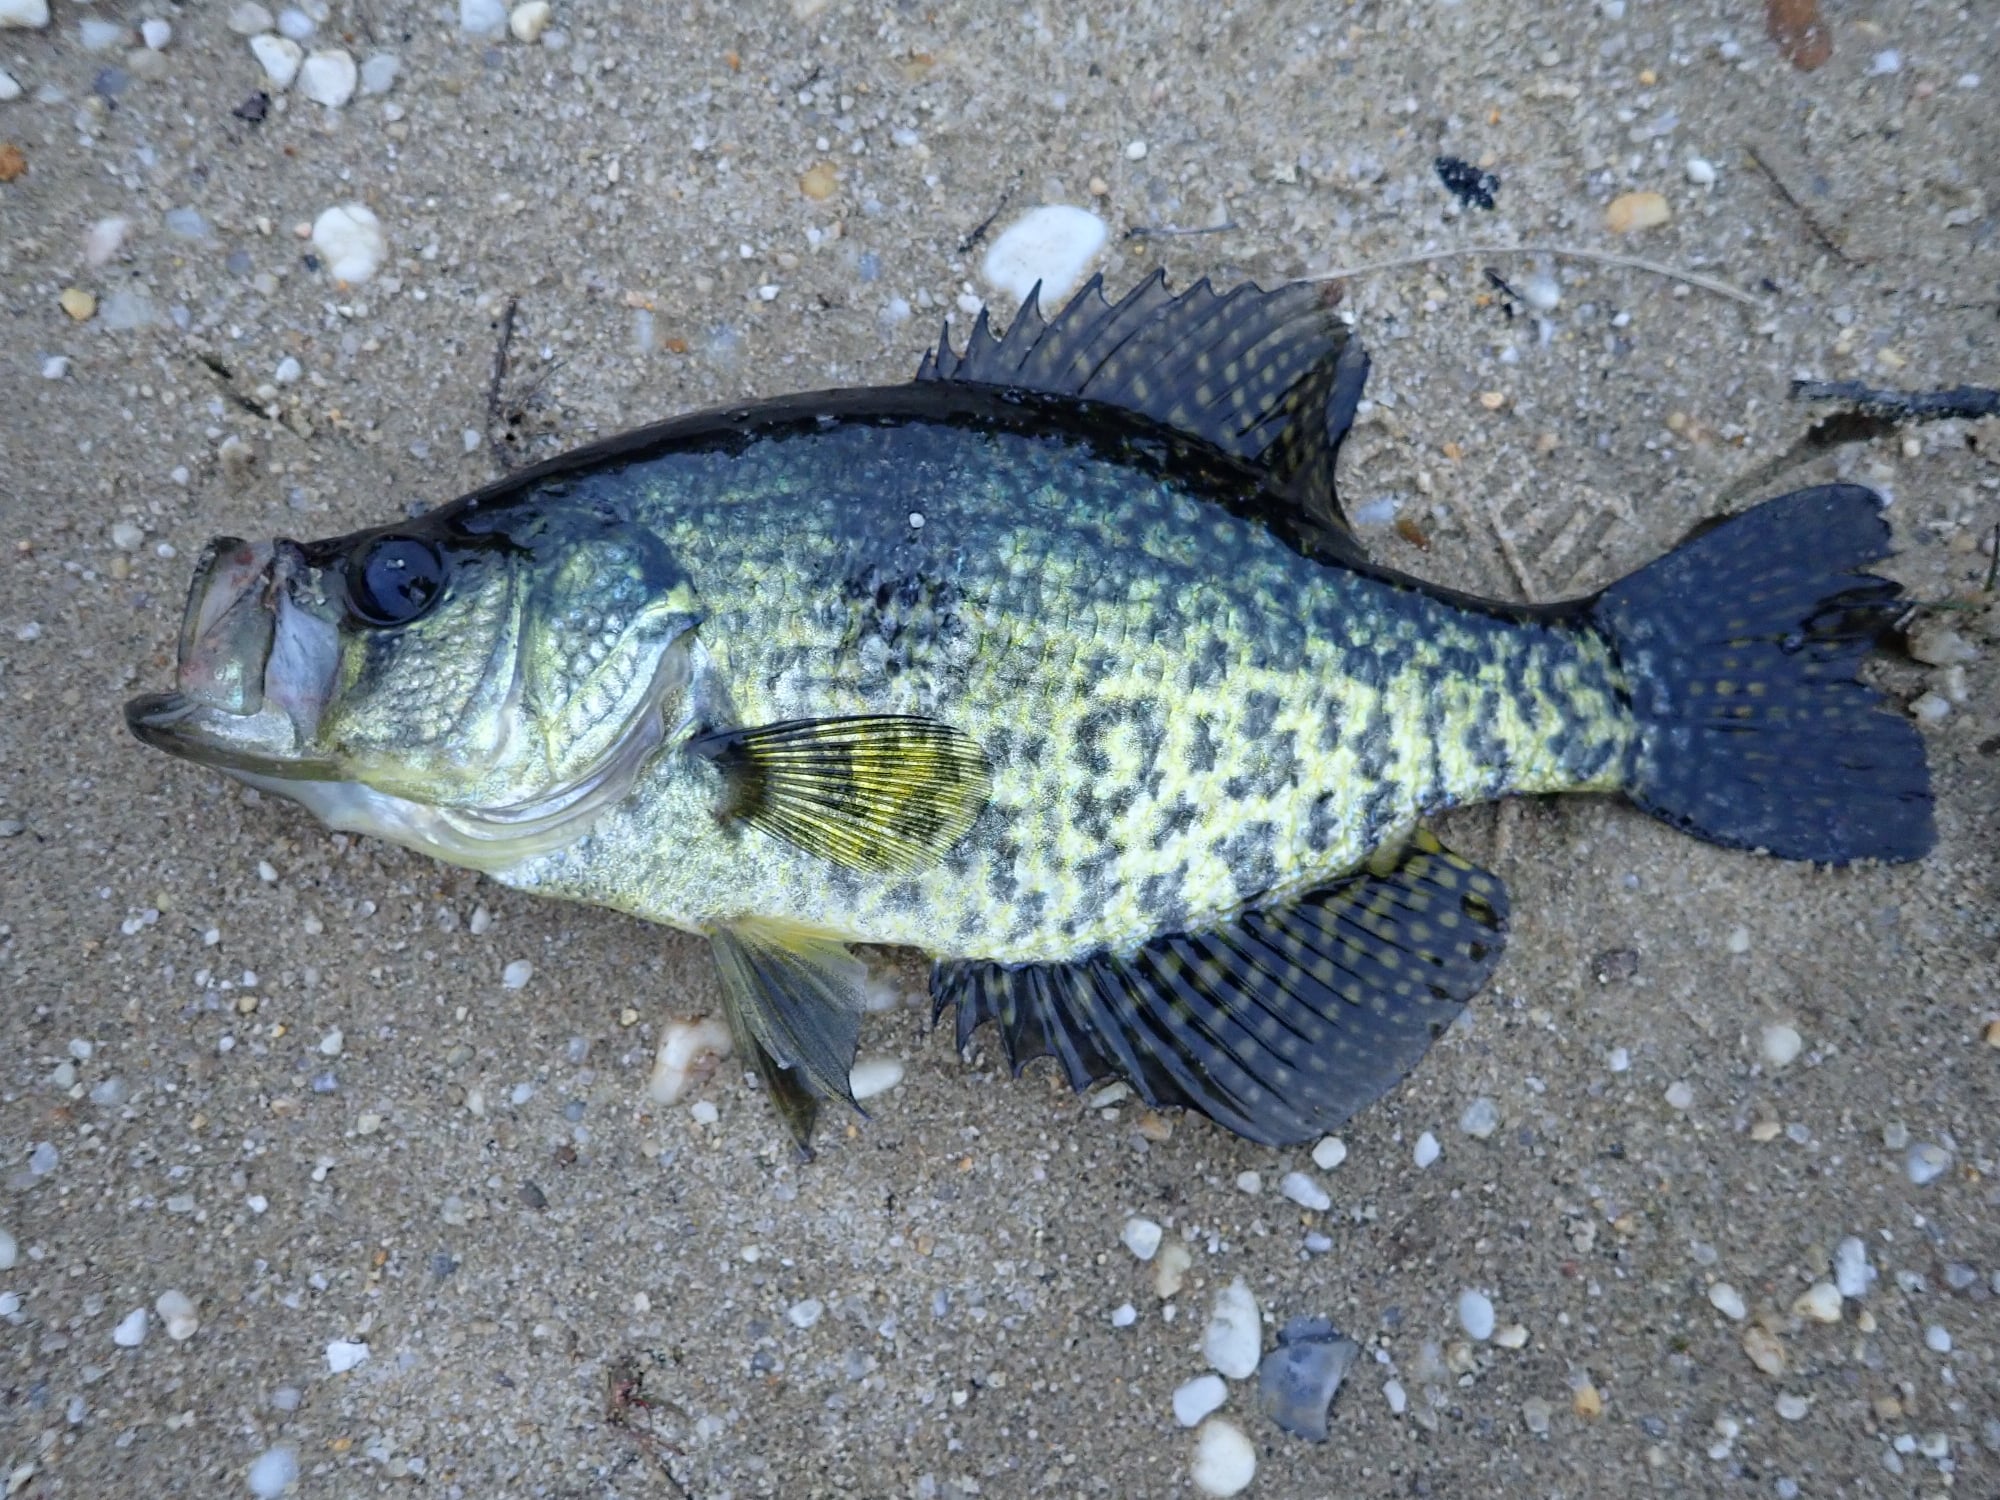 Potential competition between black crappie and invasive white